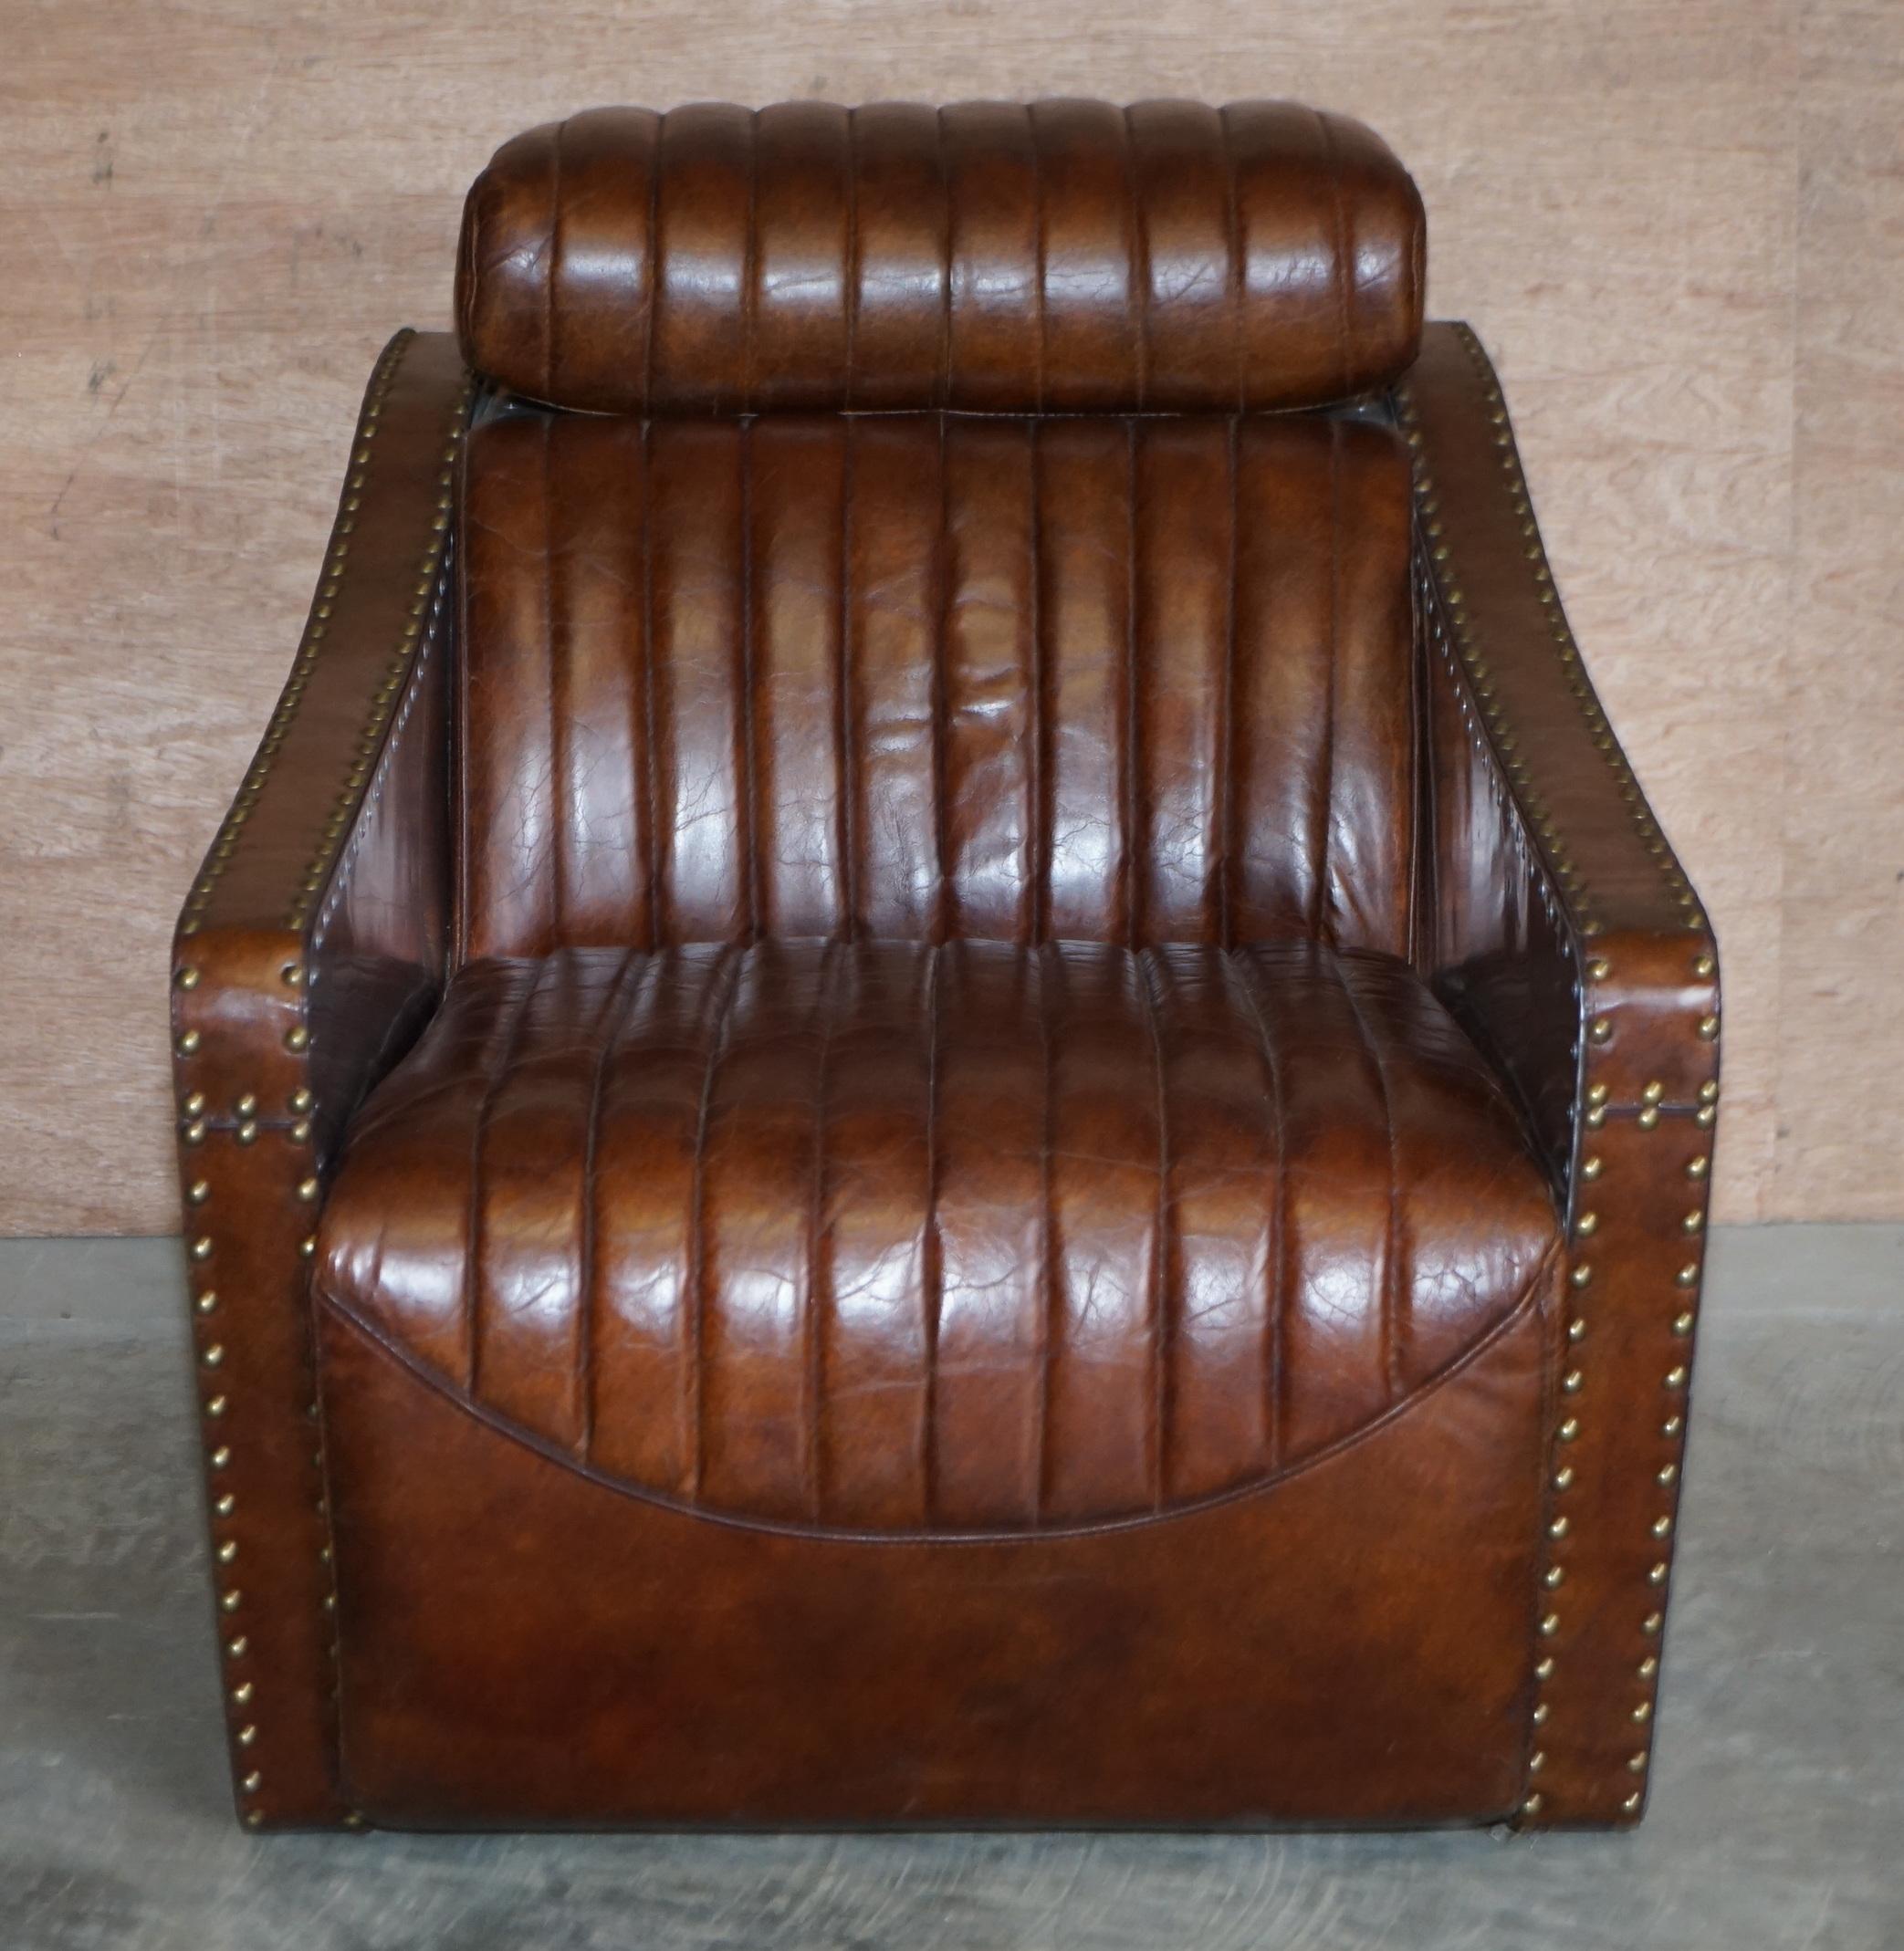 We are delighted to this sublime hand dyed ribbed brown leather Aviator armchair with studded aluminium frame and adjustable head rest

A very comfortable. Well made and dare I say it cool looking armchair made in the Aviator style. The head rest